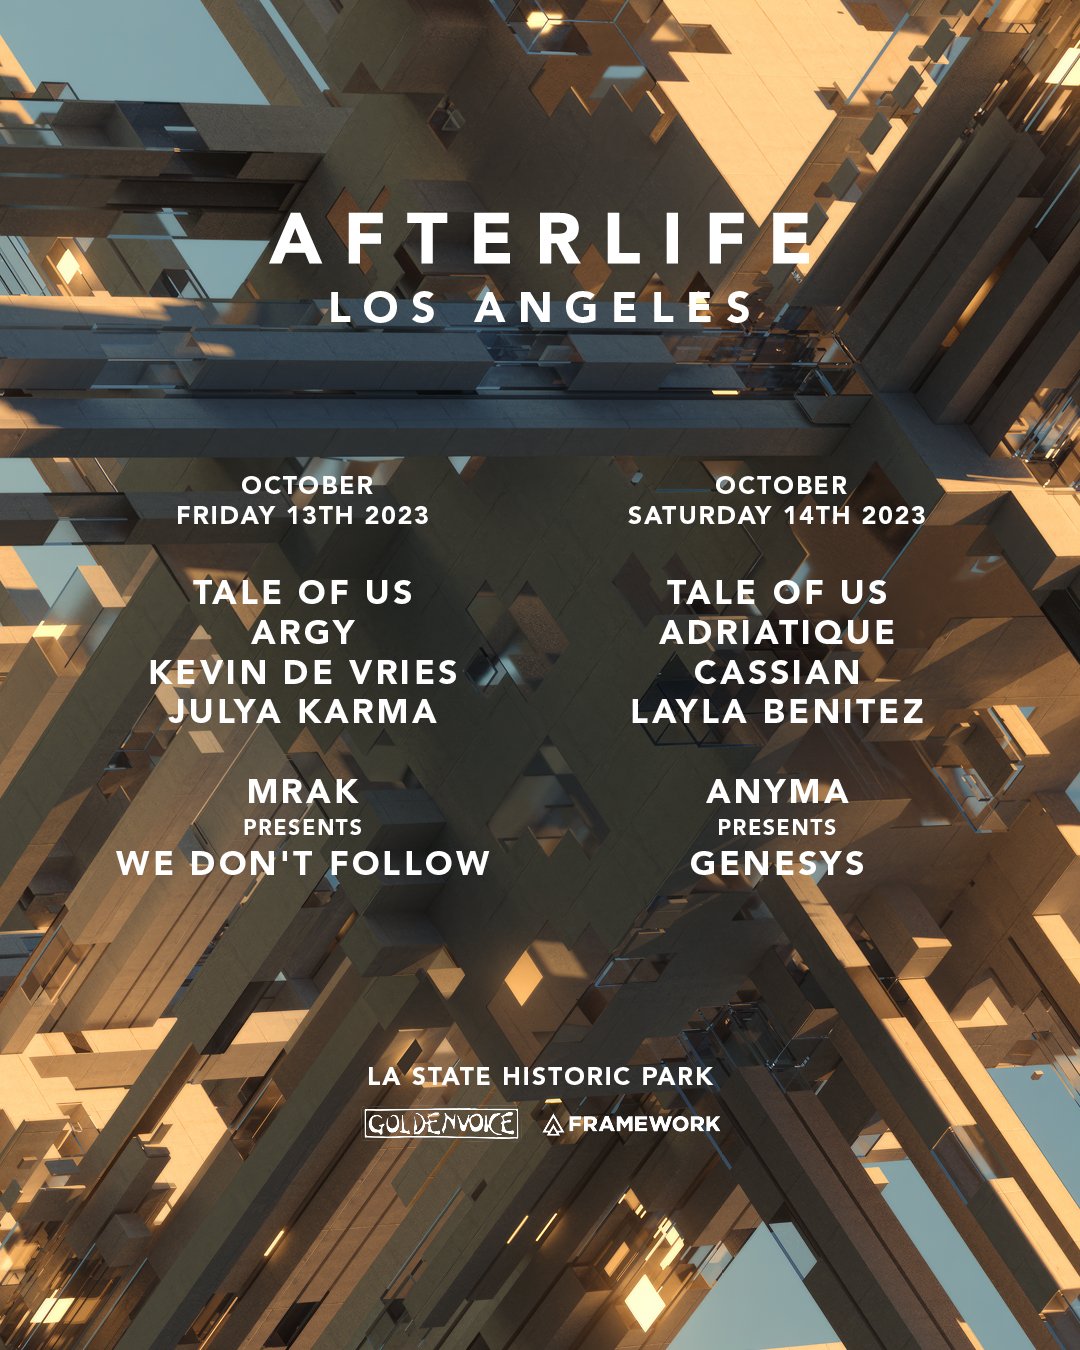 Tale of Us Deliver Unforgettable Weekend with their Afterlife Los Angeles  Debut - Exron Music